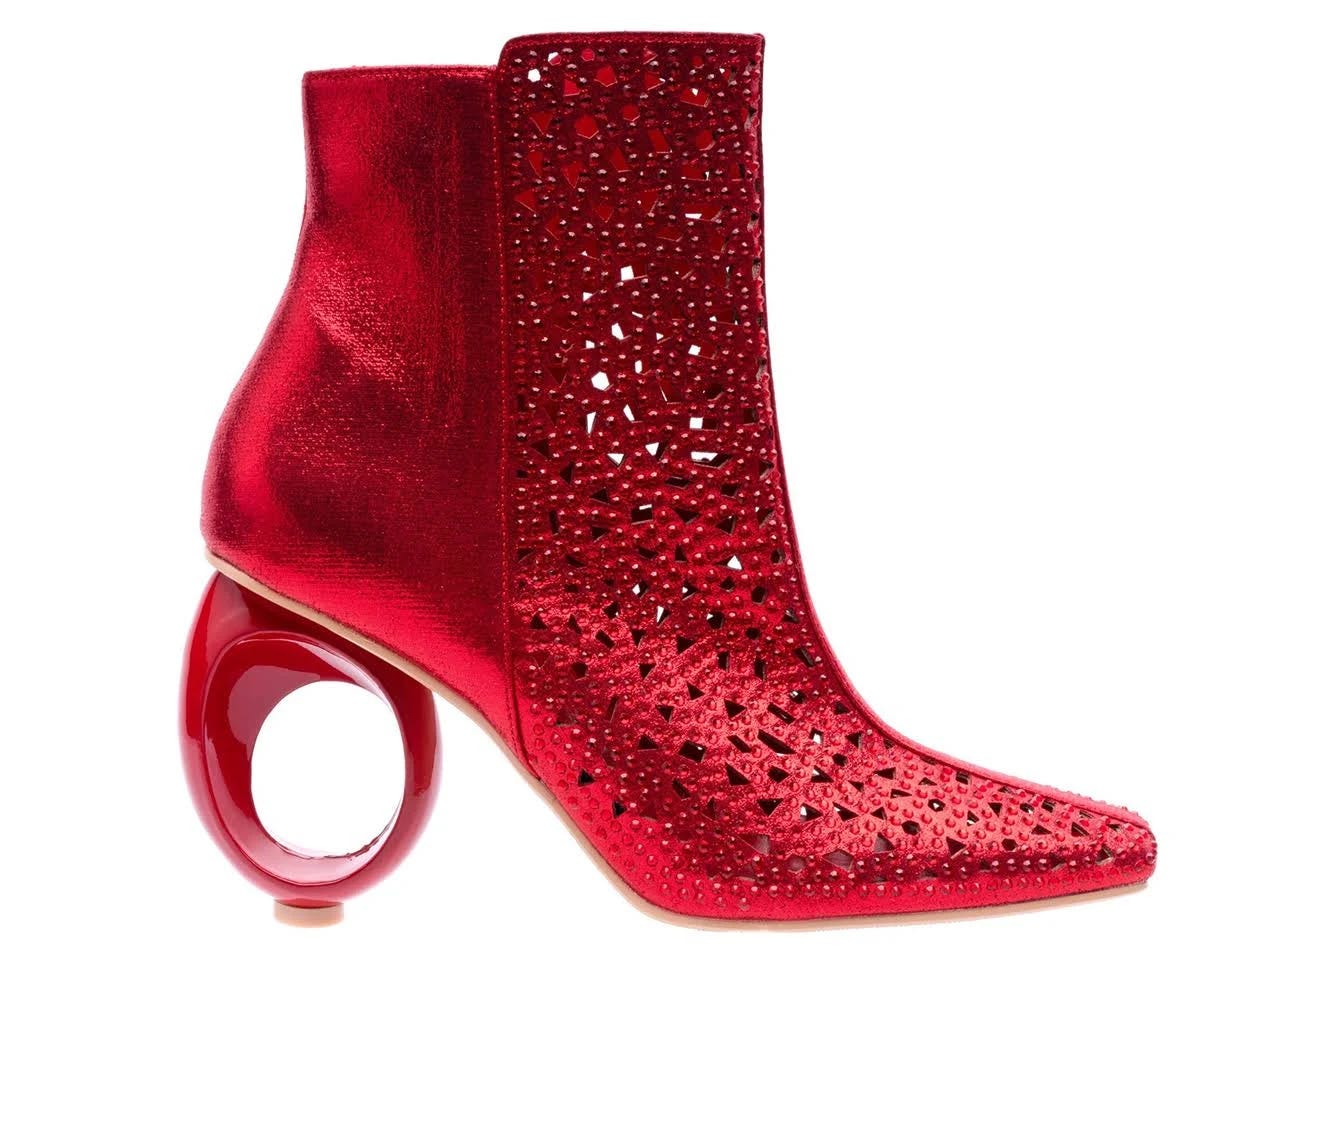 Lady Couture Breeze Heeled Booties: Red Square-Toe Design with Rhinestones and Swirled Heel | Image